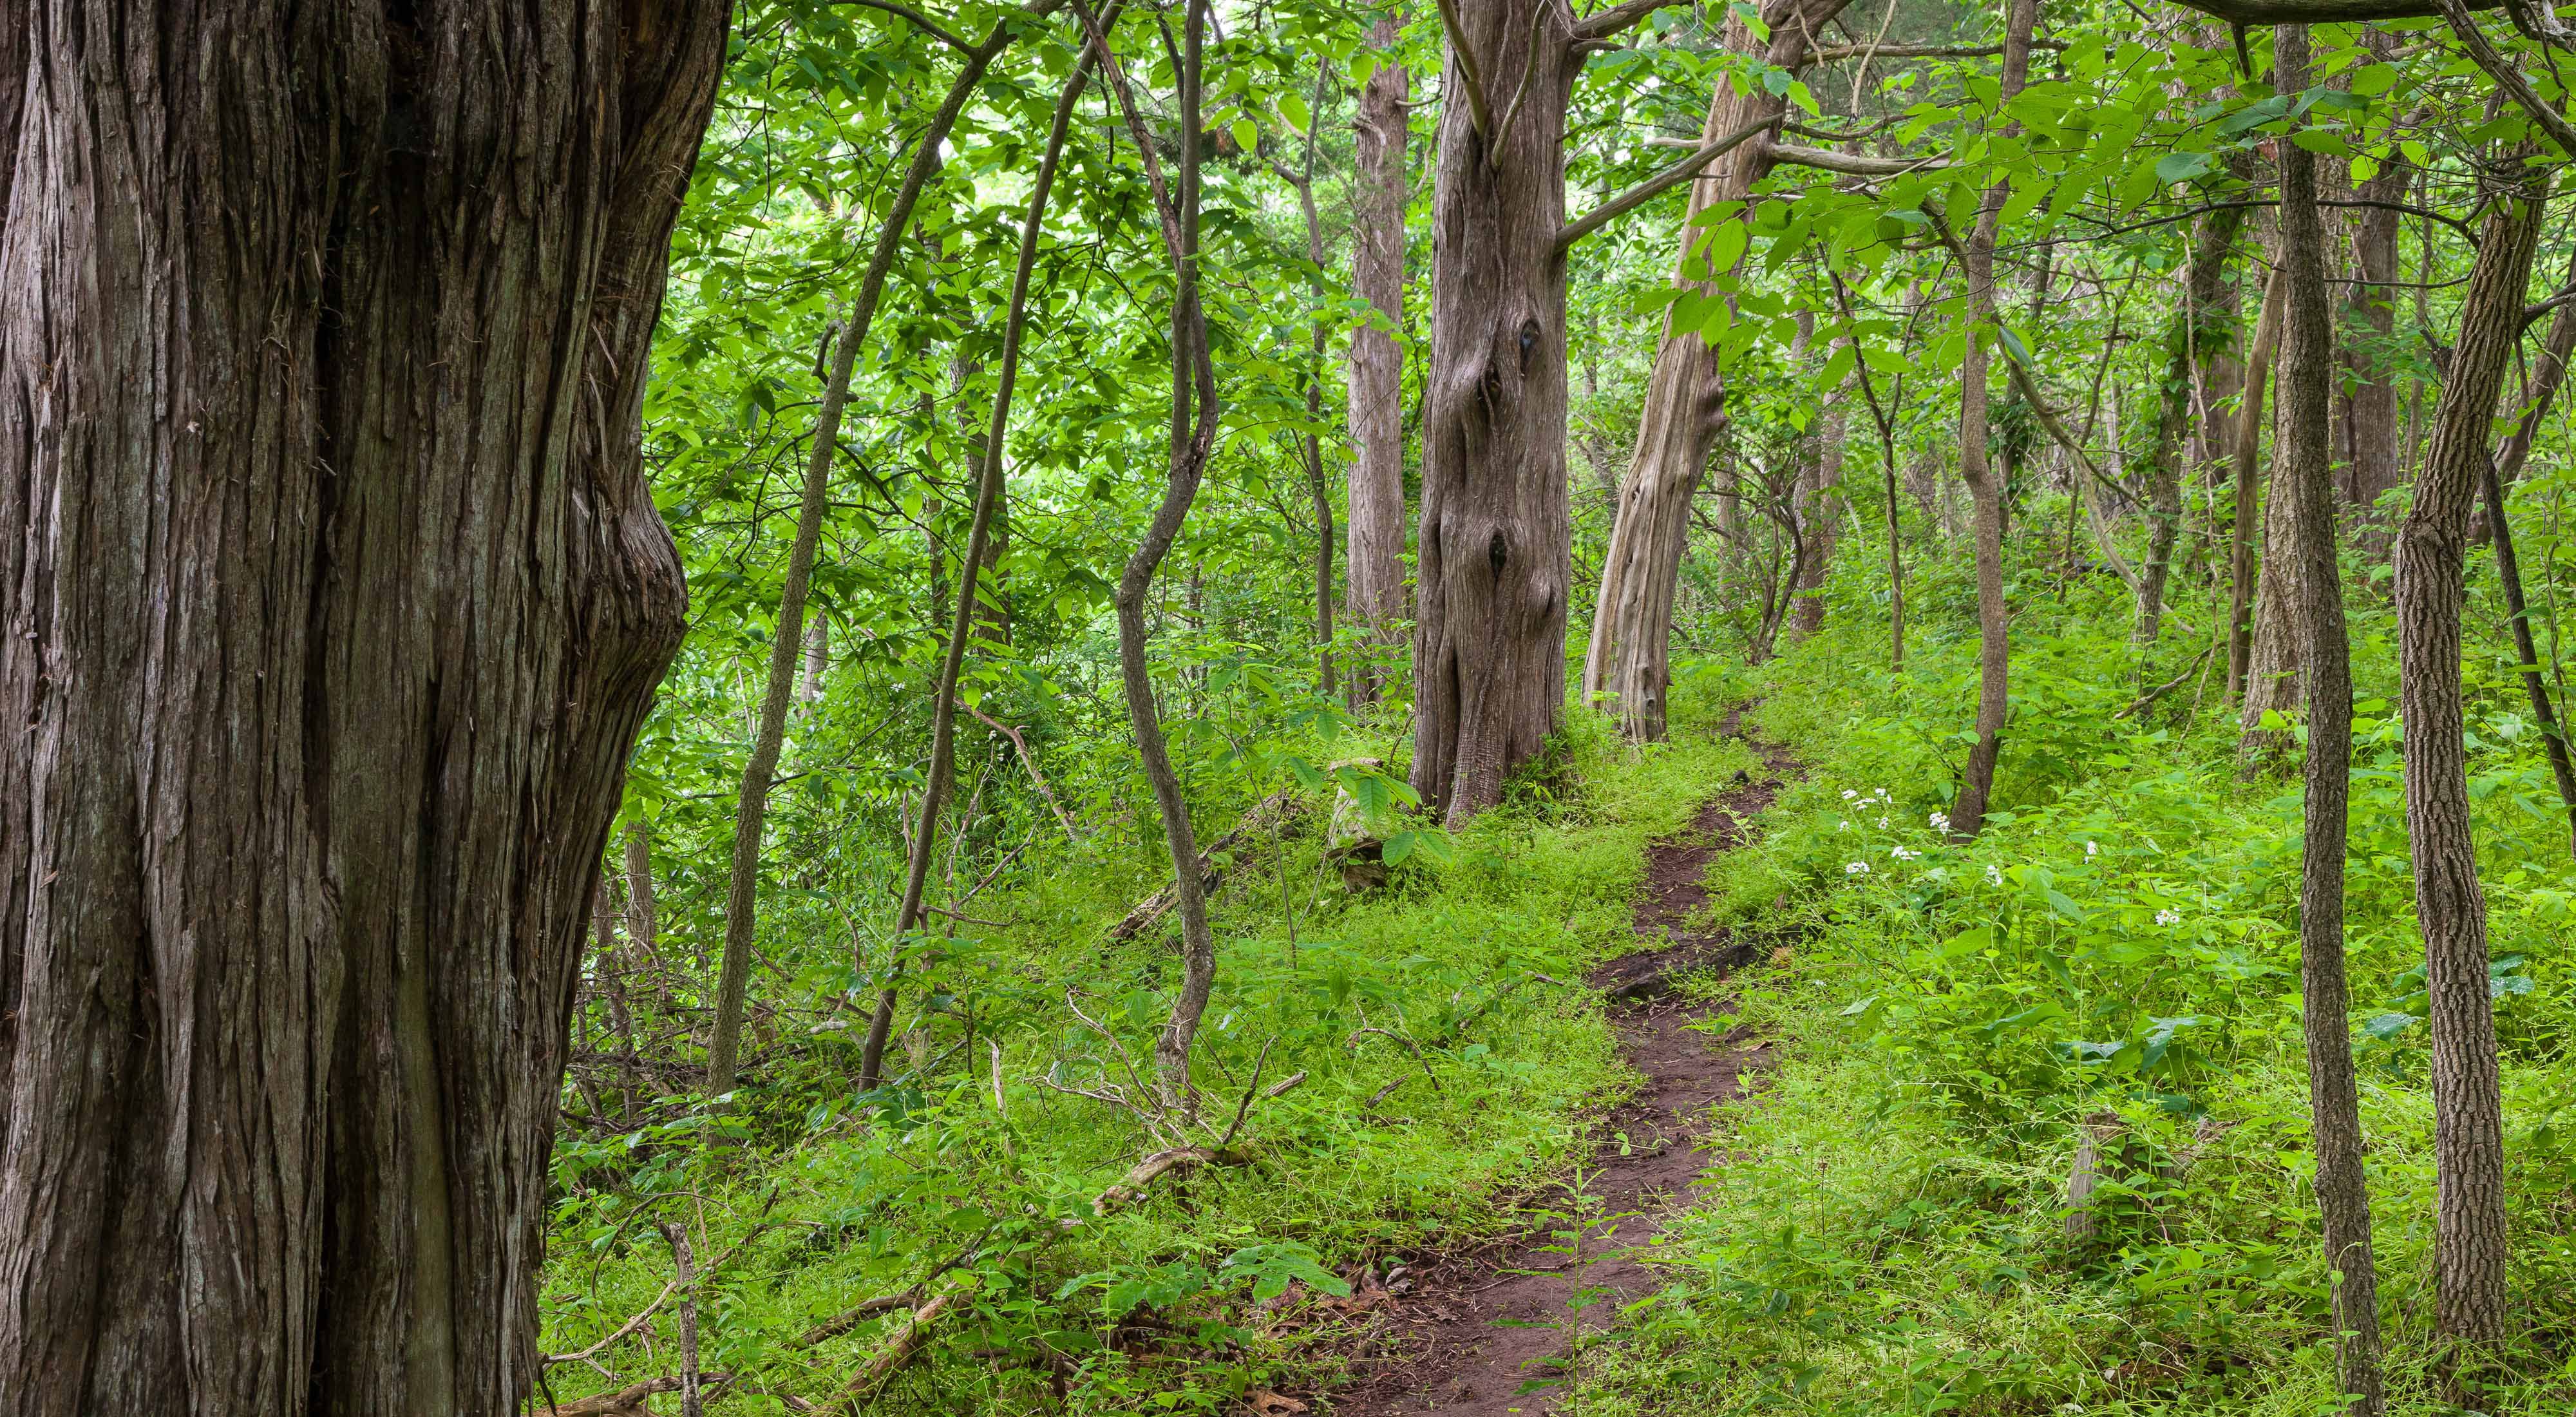 A narrow dirt trail winds through a densely wooded forest.